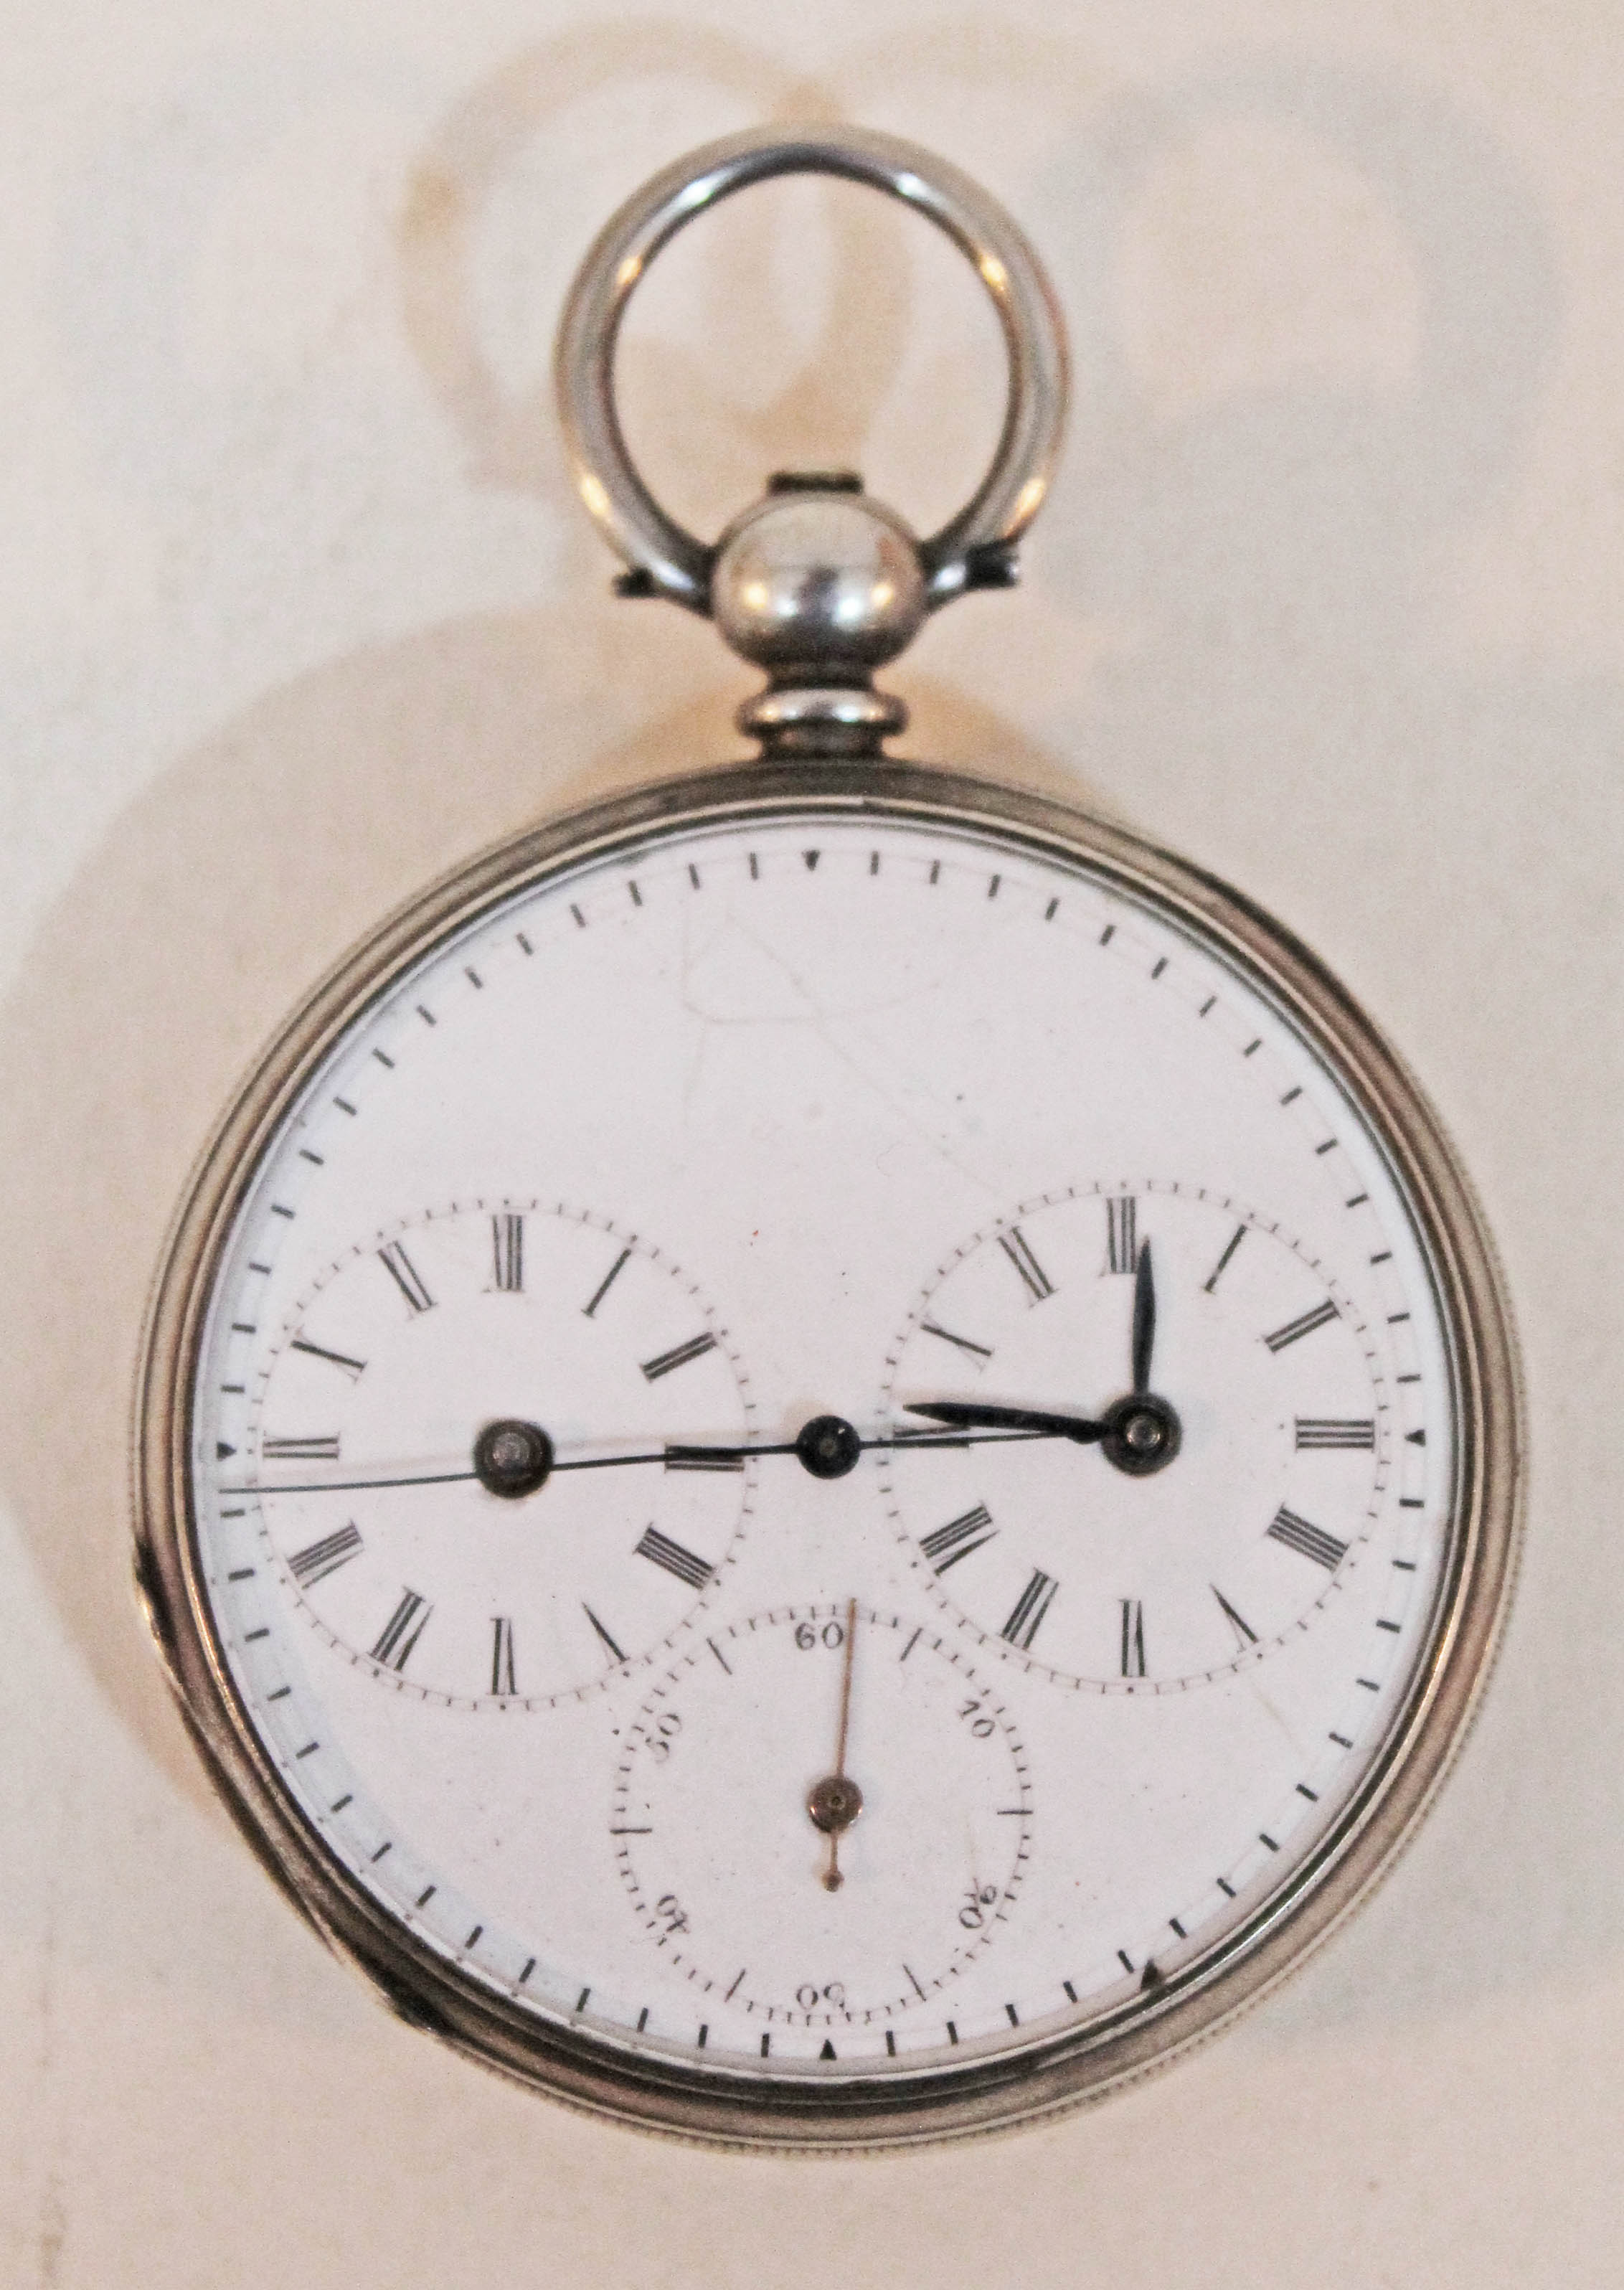 A Chinese Duplex pocket watch, white metal case, centre seconds dial with dual hour and minute